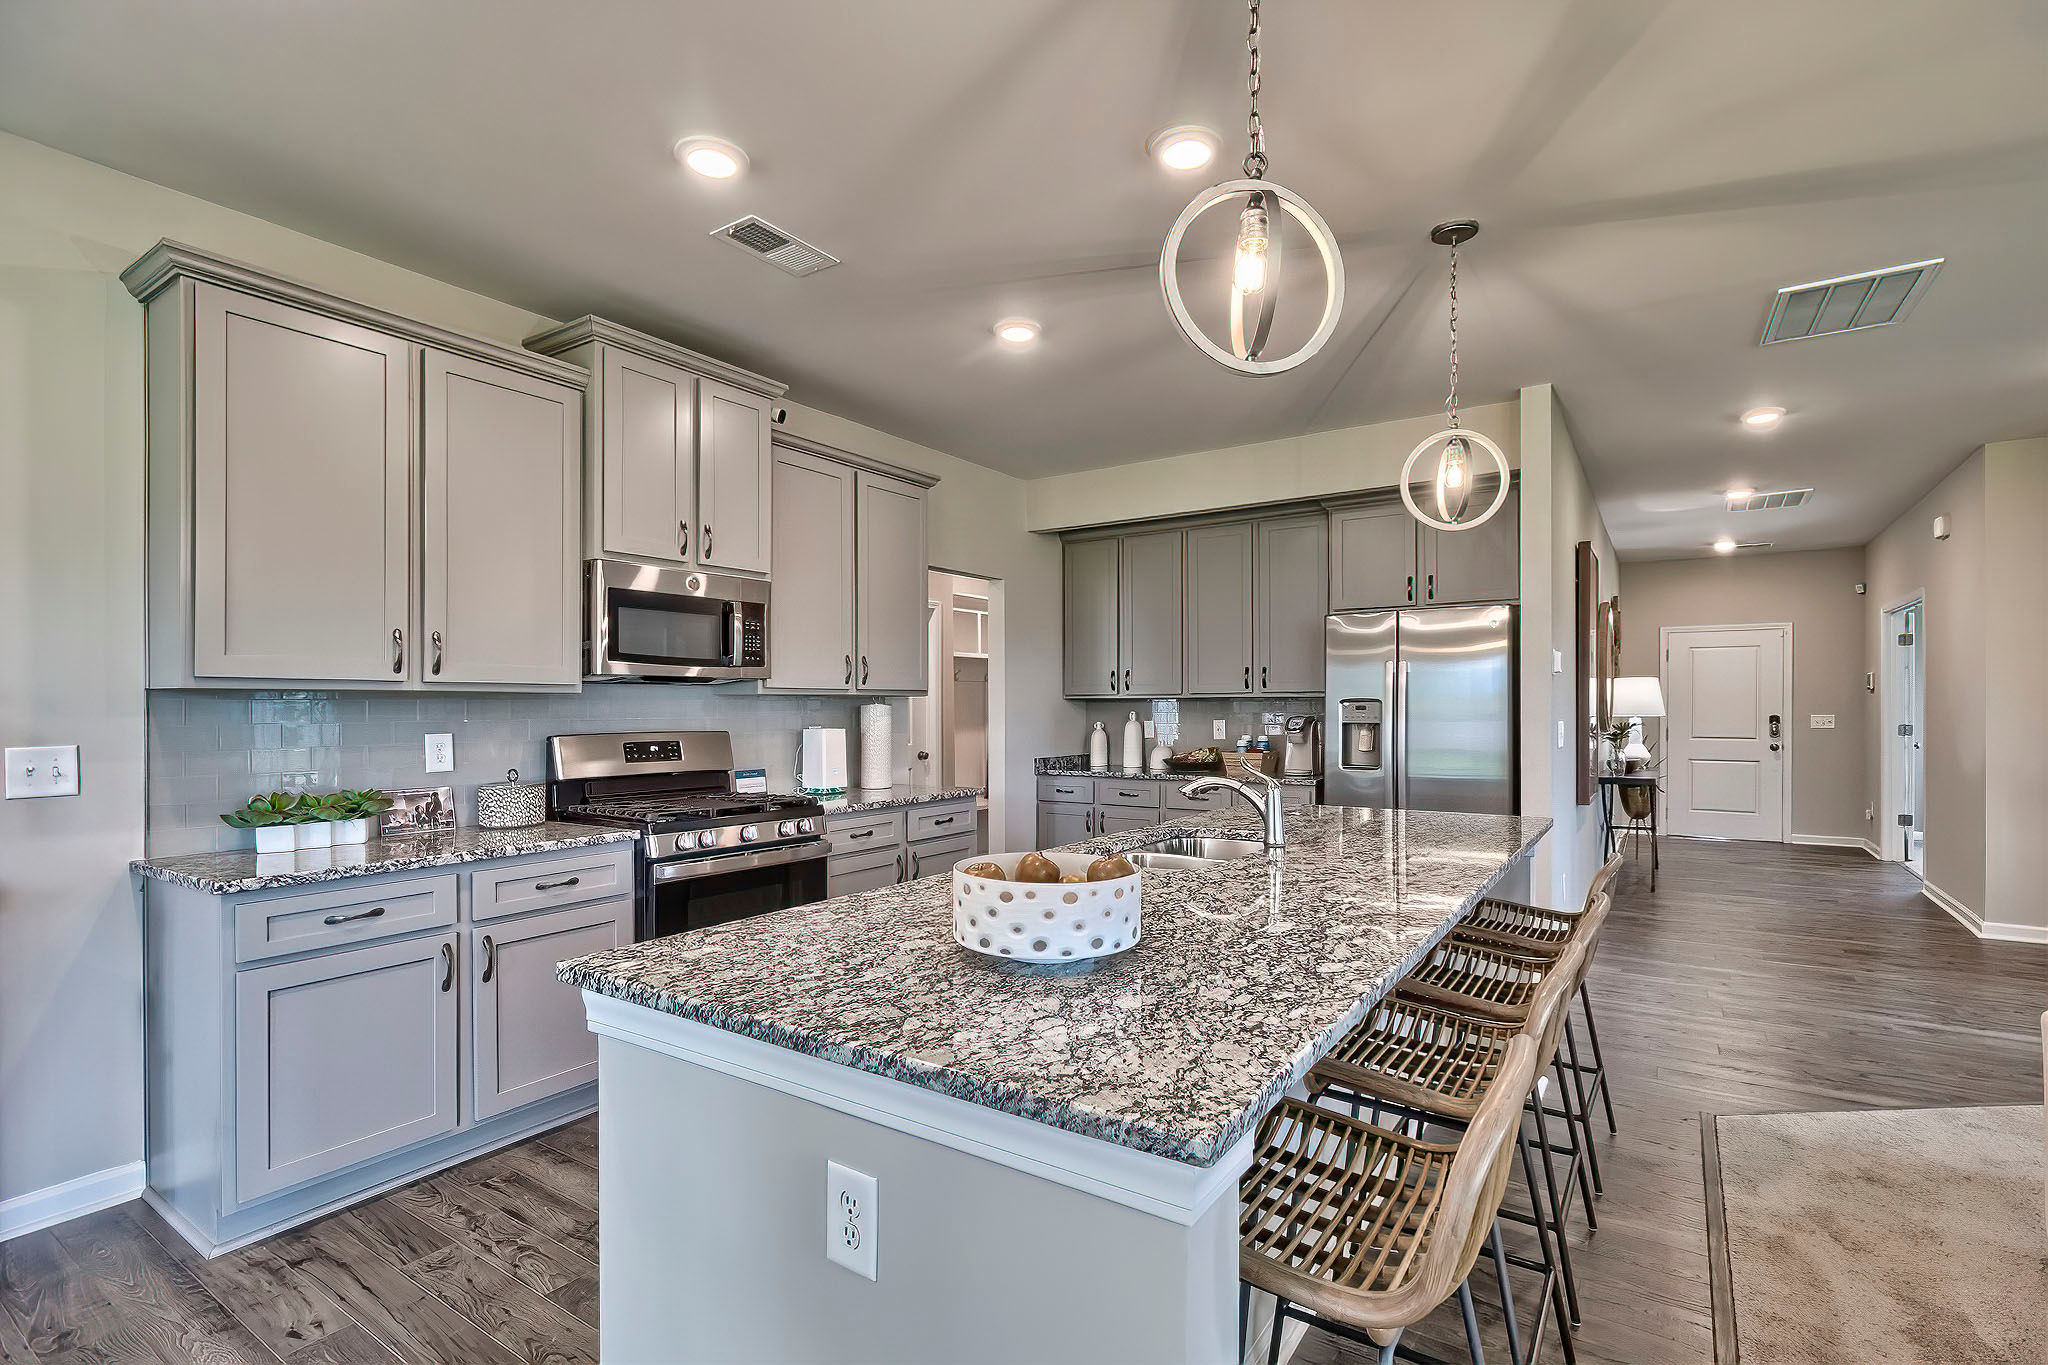 Gather, cook and create in style in this spacious kitchen with update appliances